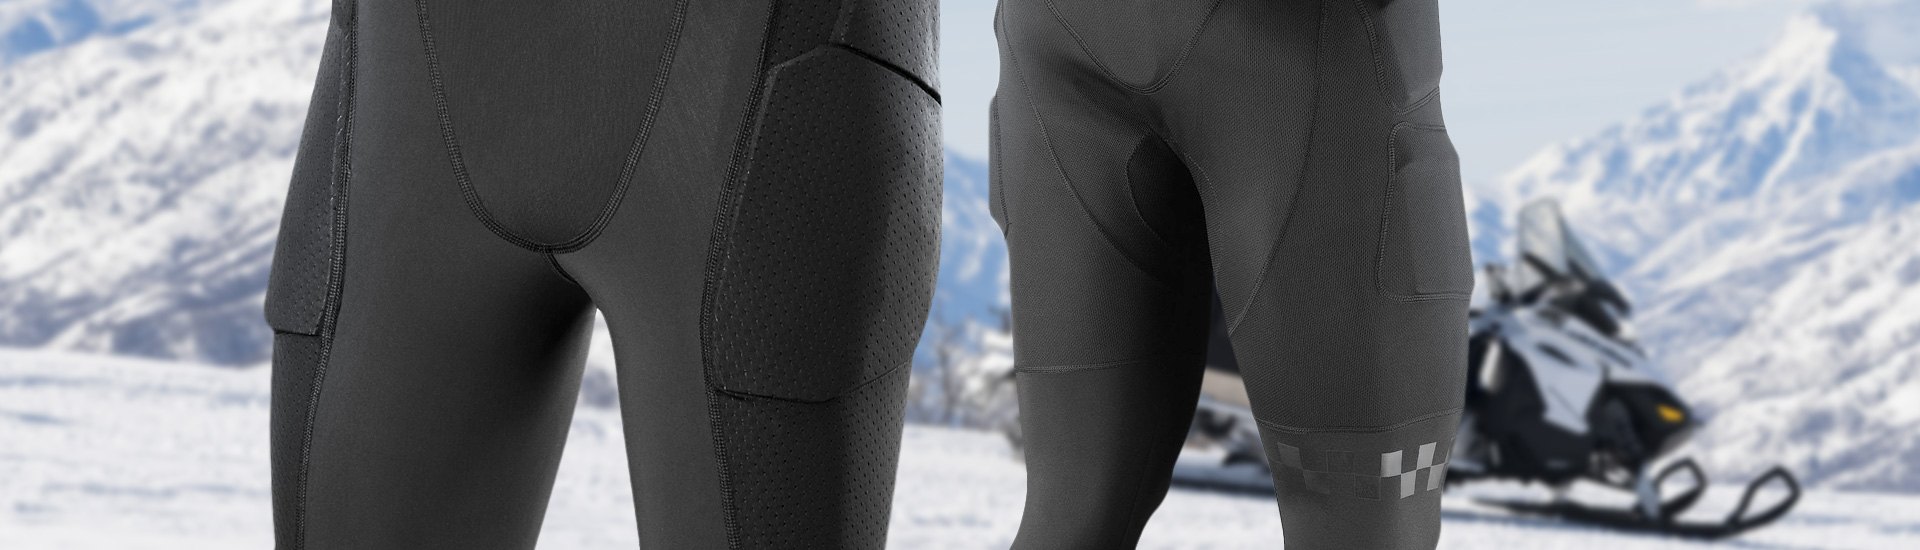 Powersports Armored Pants